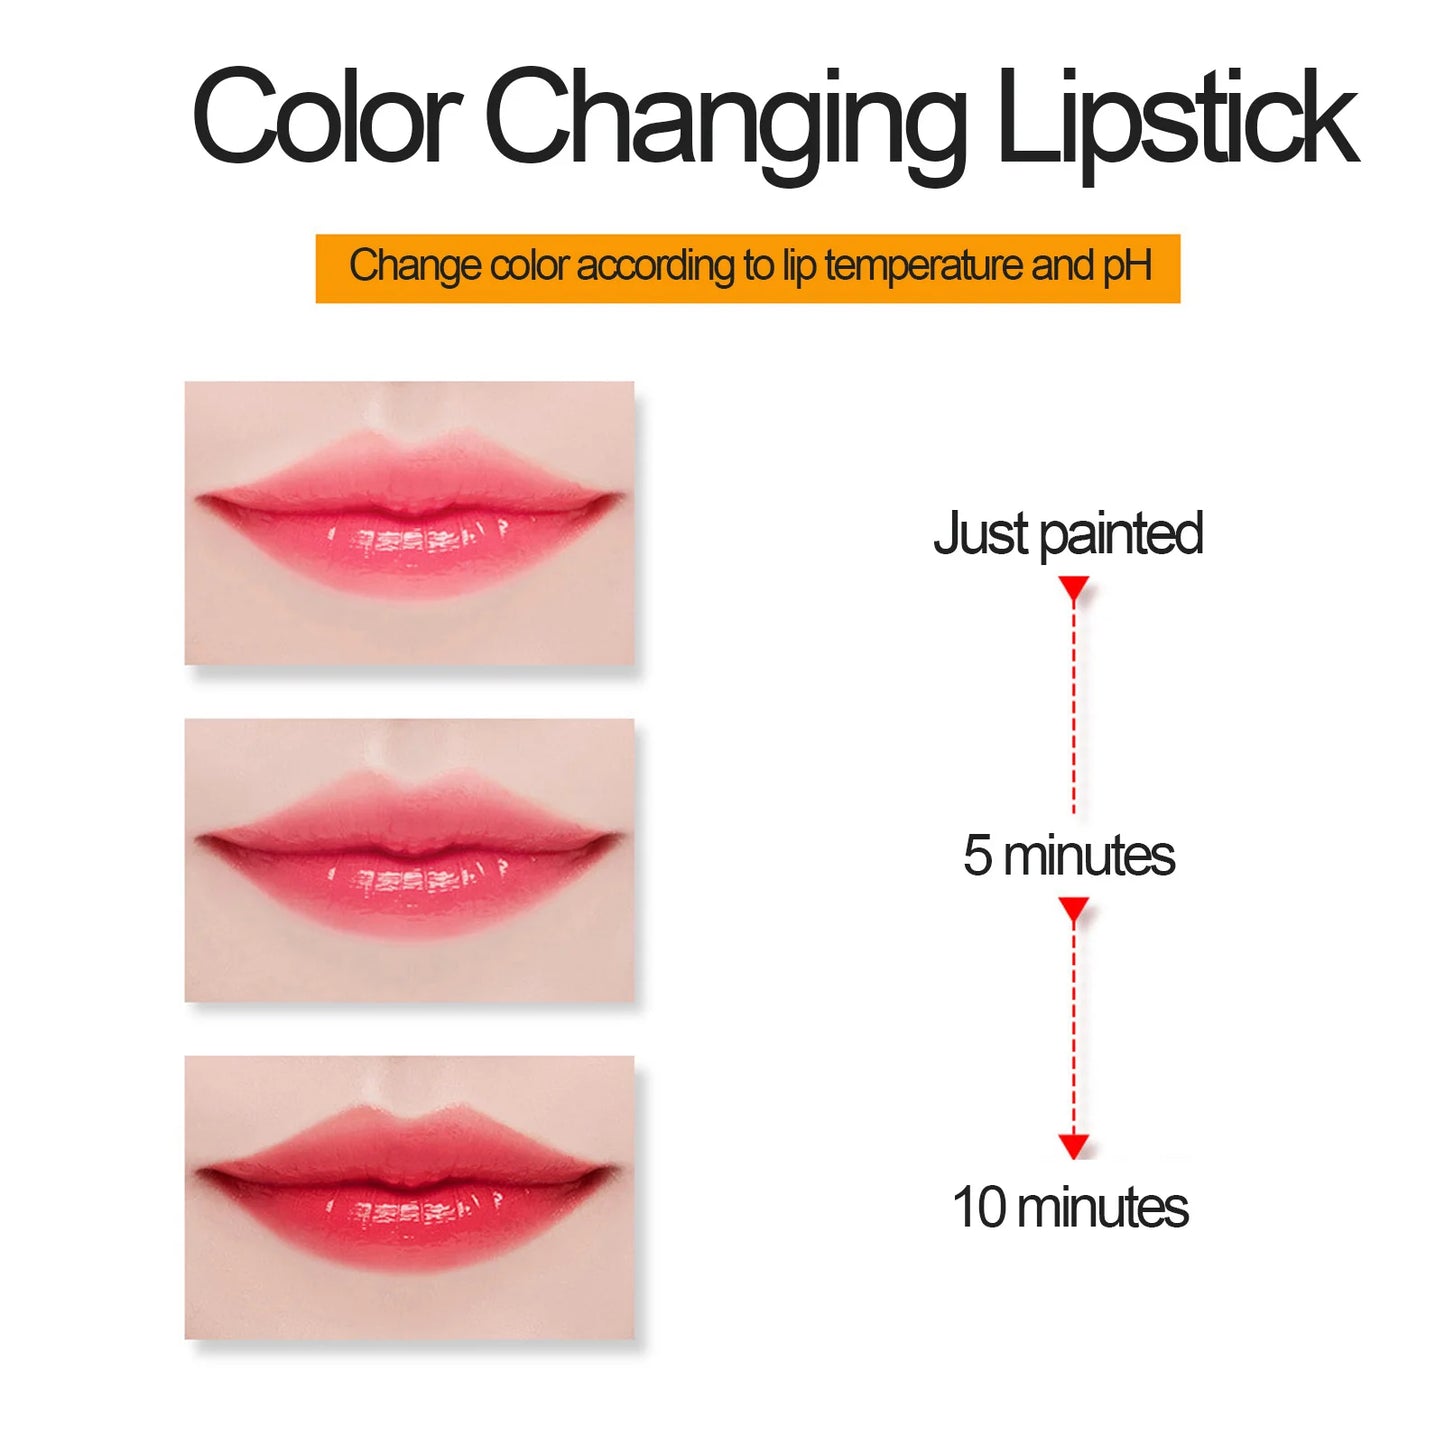 Color Changing Lipstick Moisturising Nourishing Lipstick Color Change Magic Lipstick by Himidity of Your Lips Women and Girls